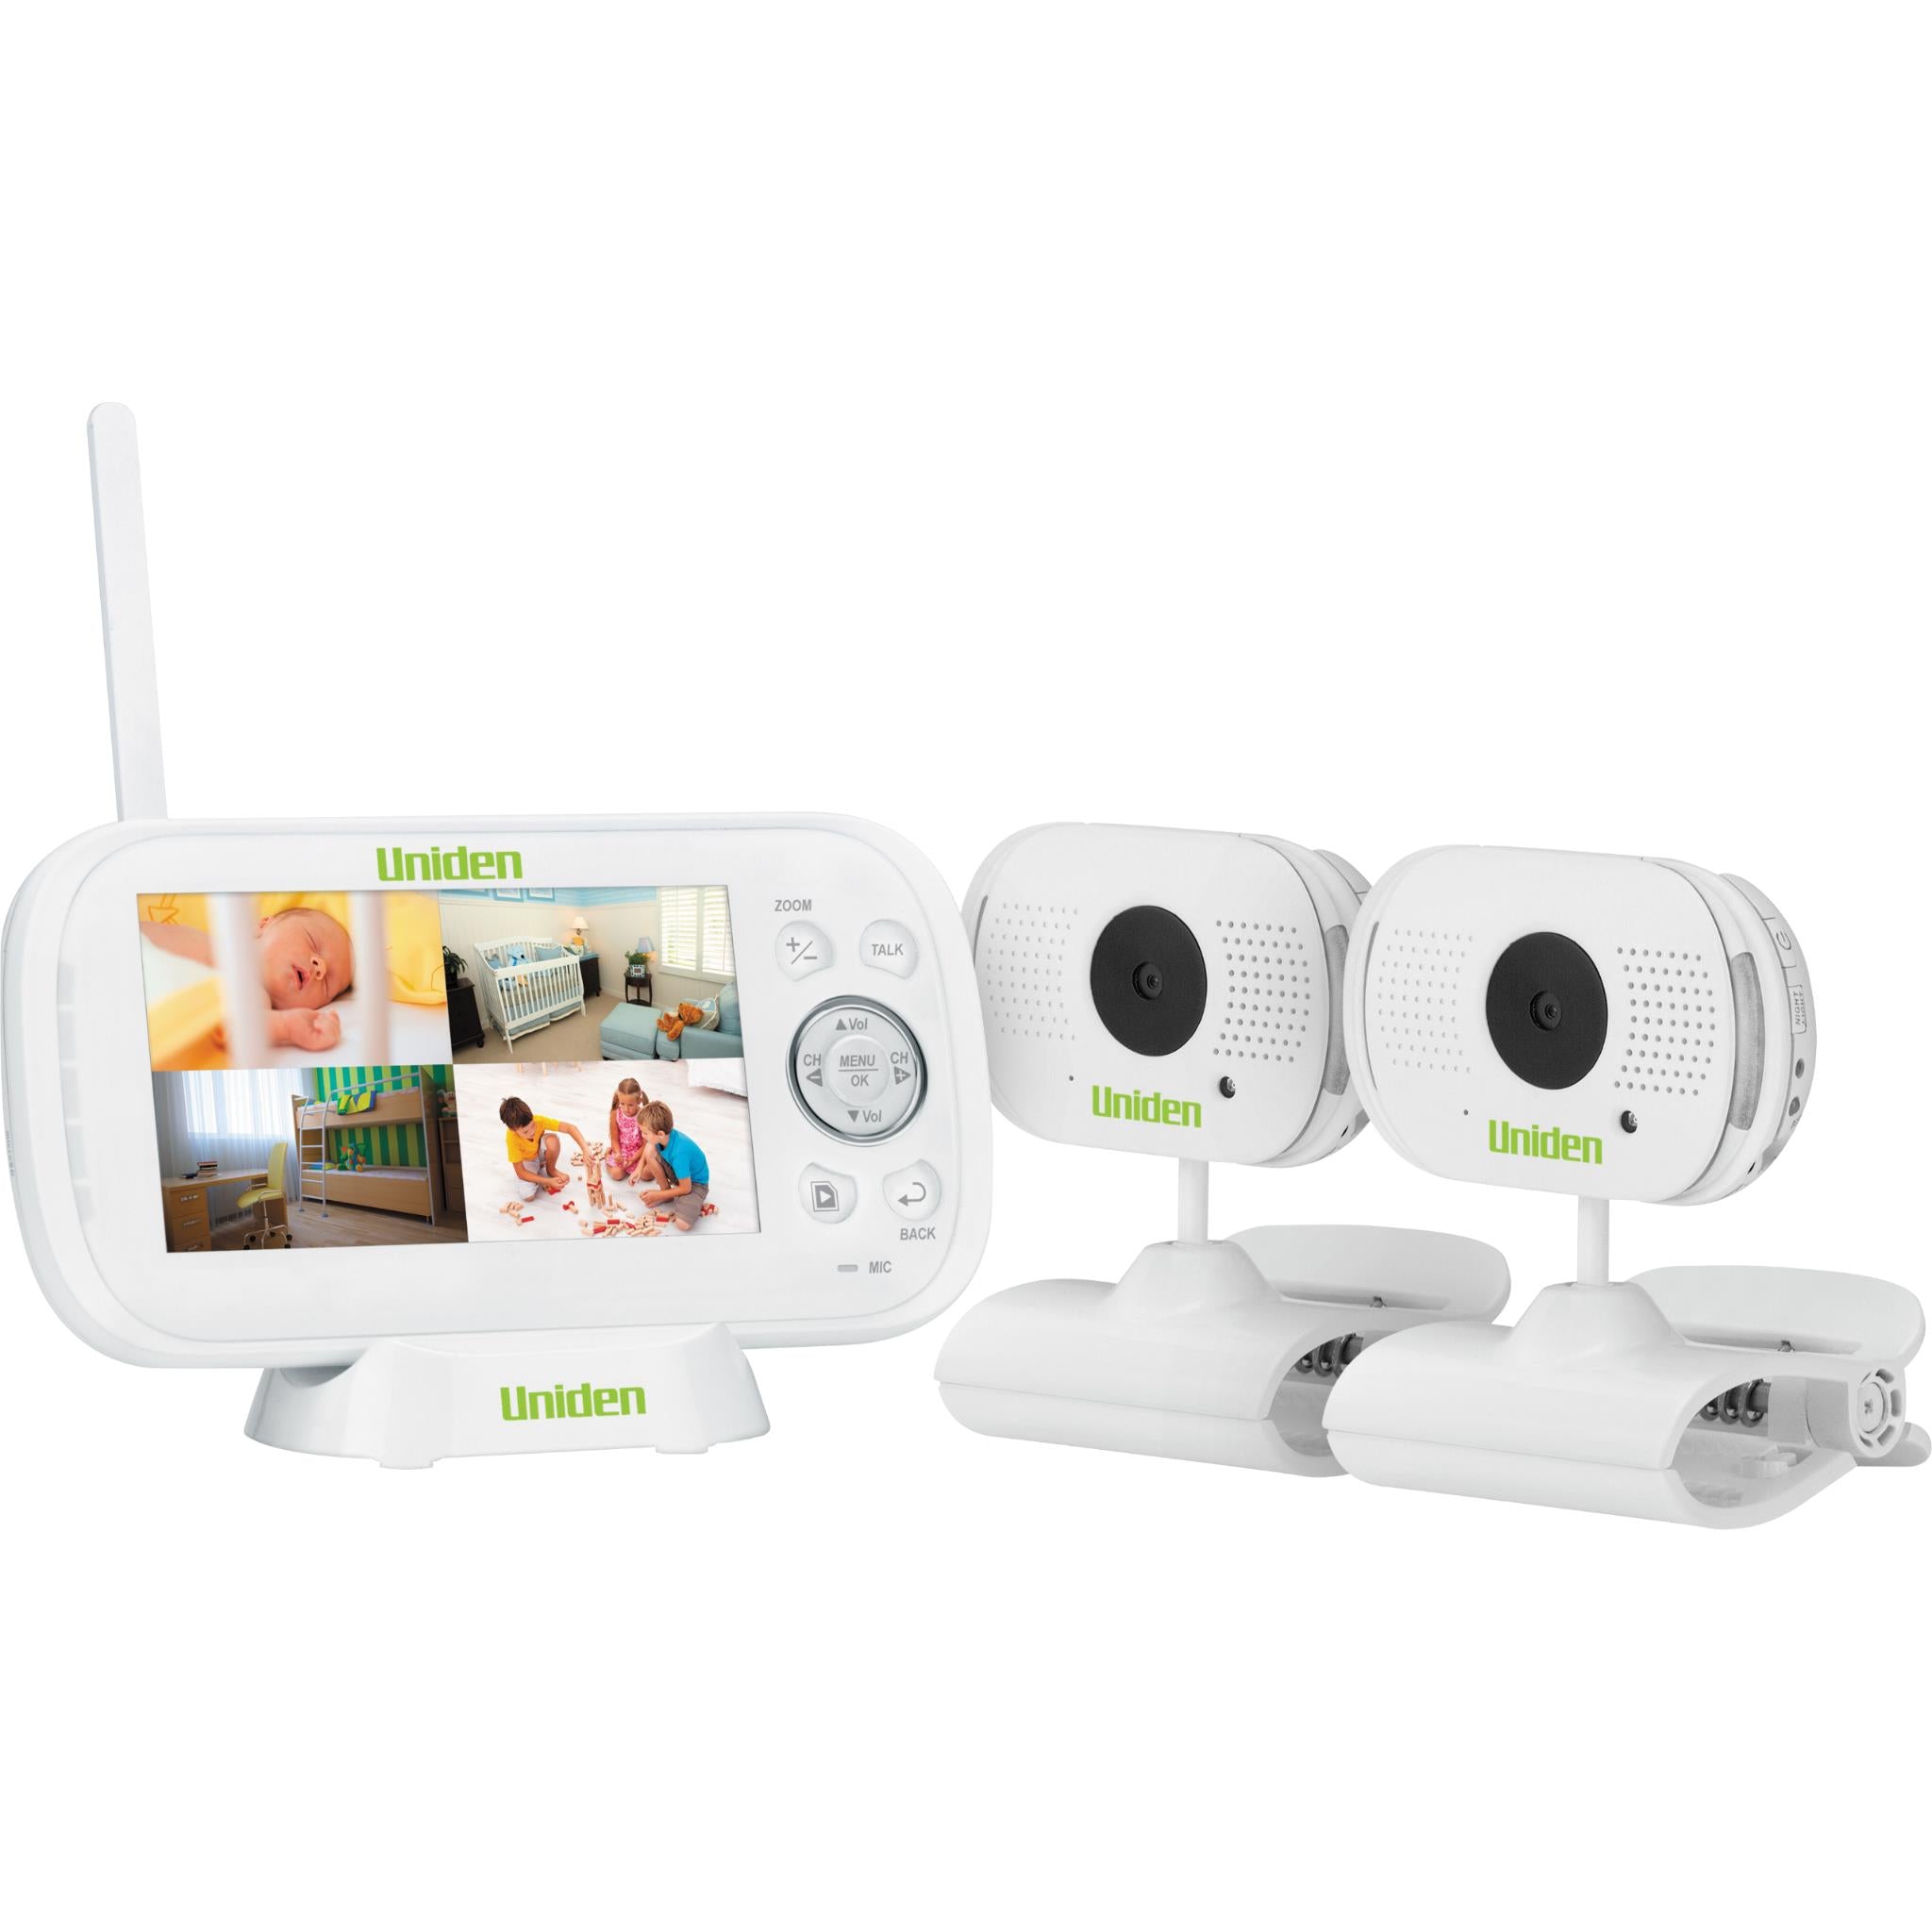 uniden bw3102 4.3" digital wireless baby video monitor with two cameras